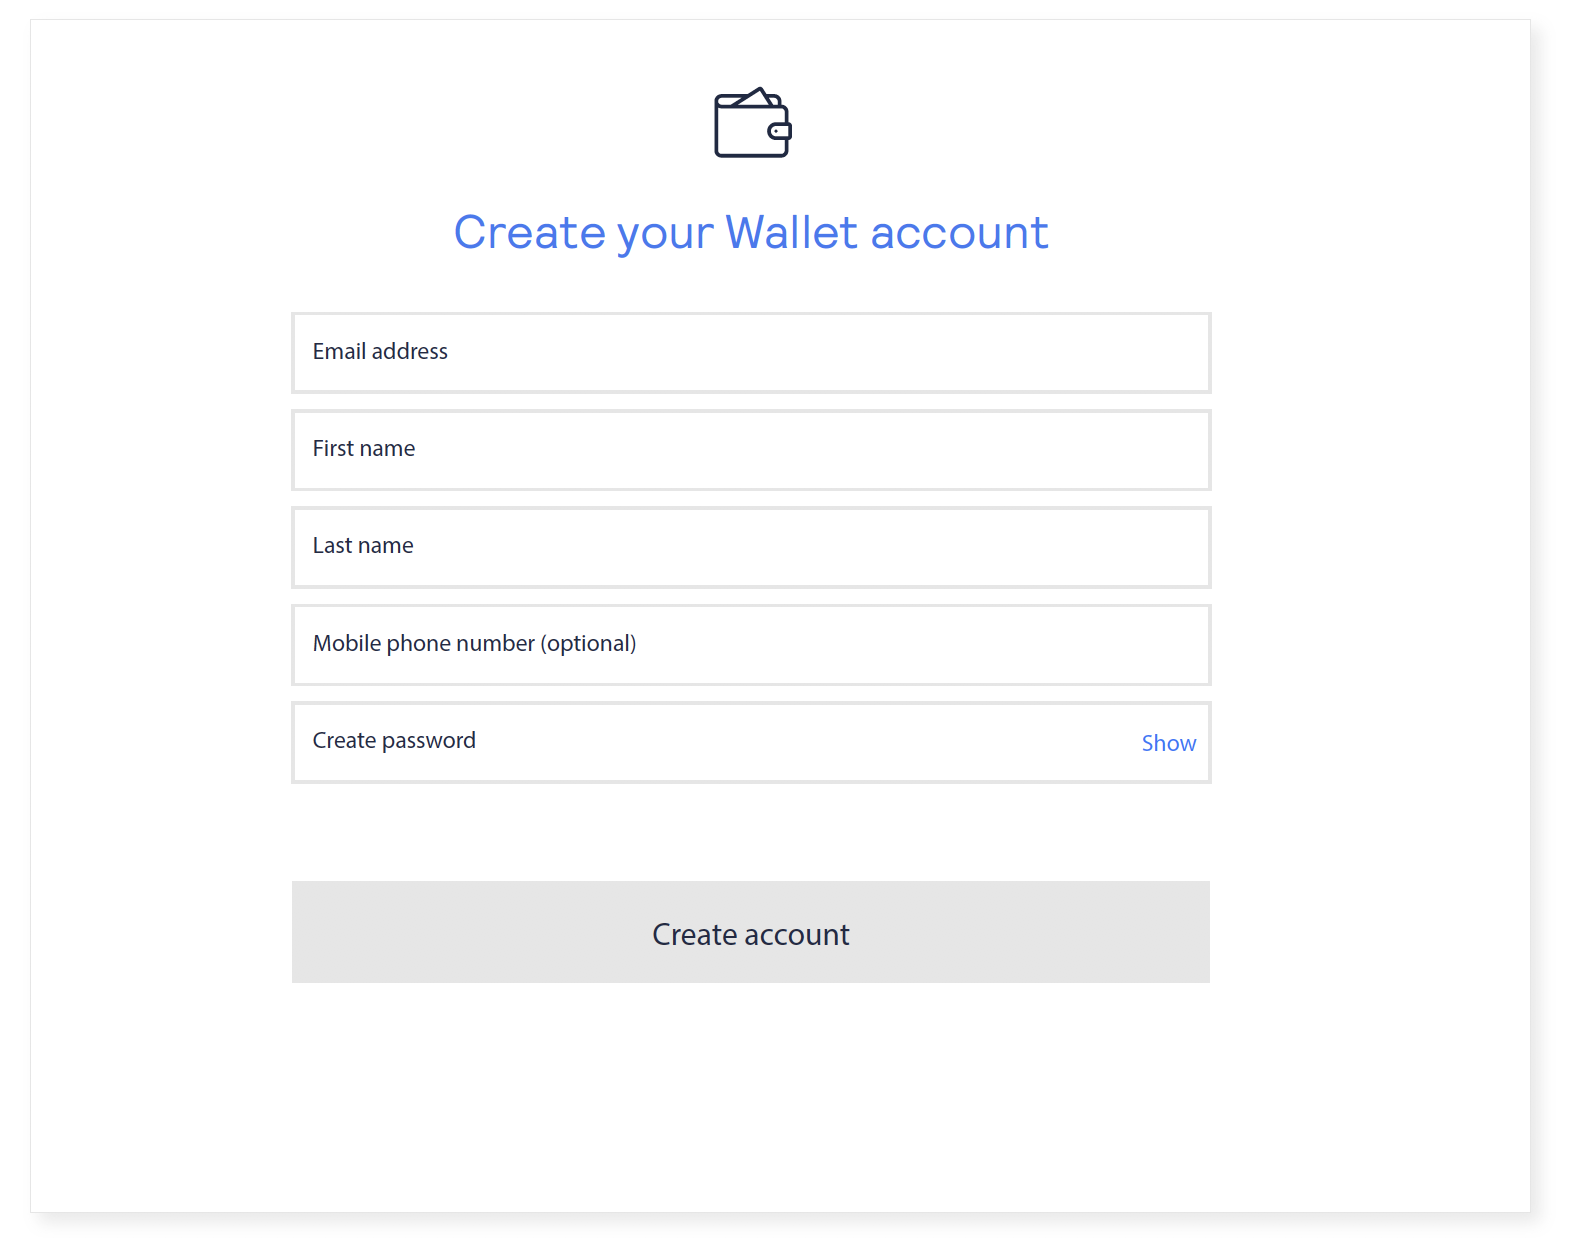 Create a new wallet account